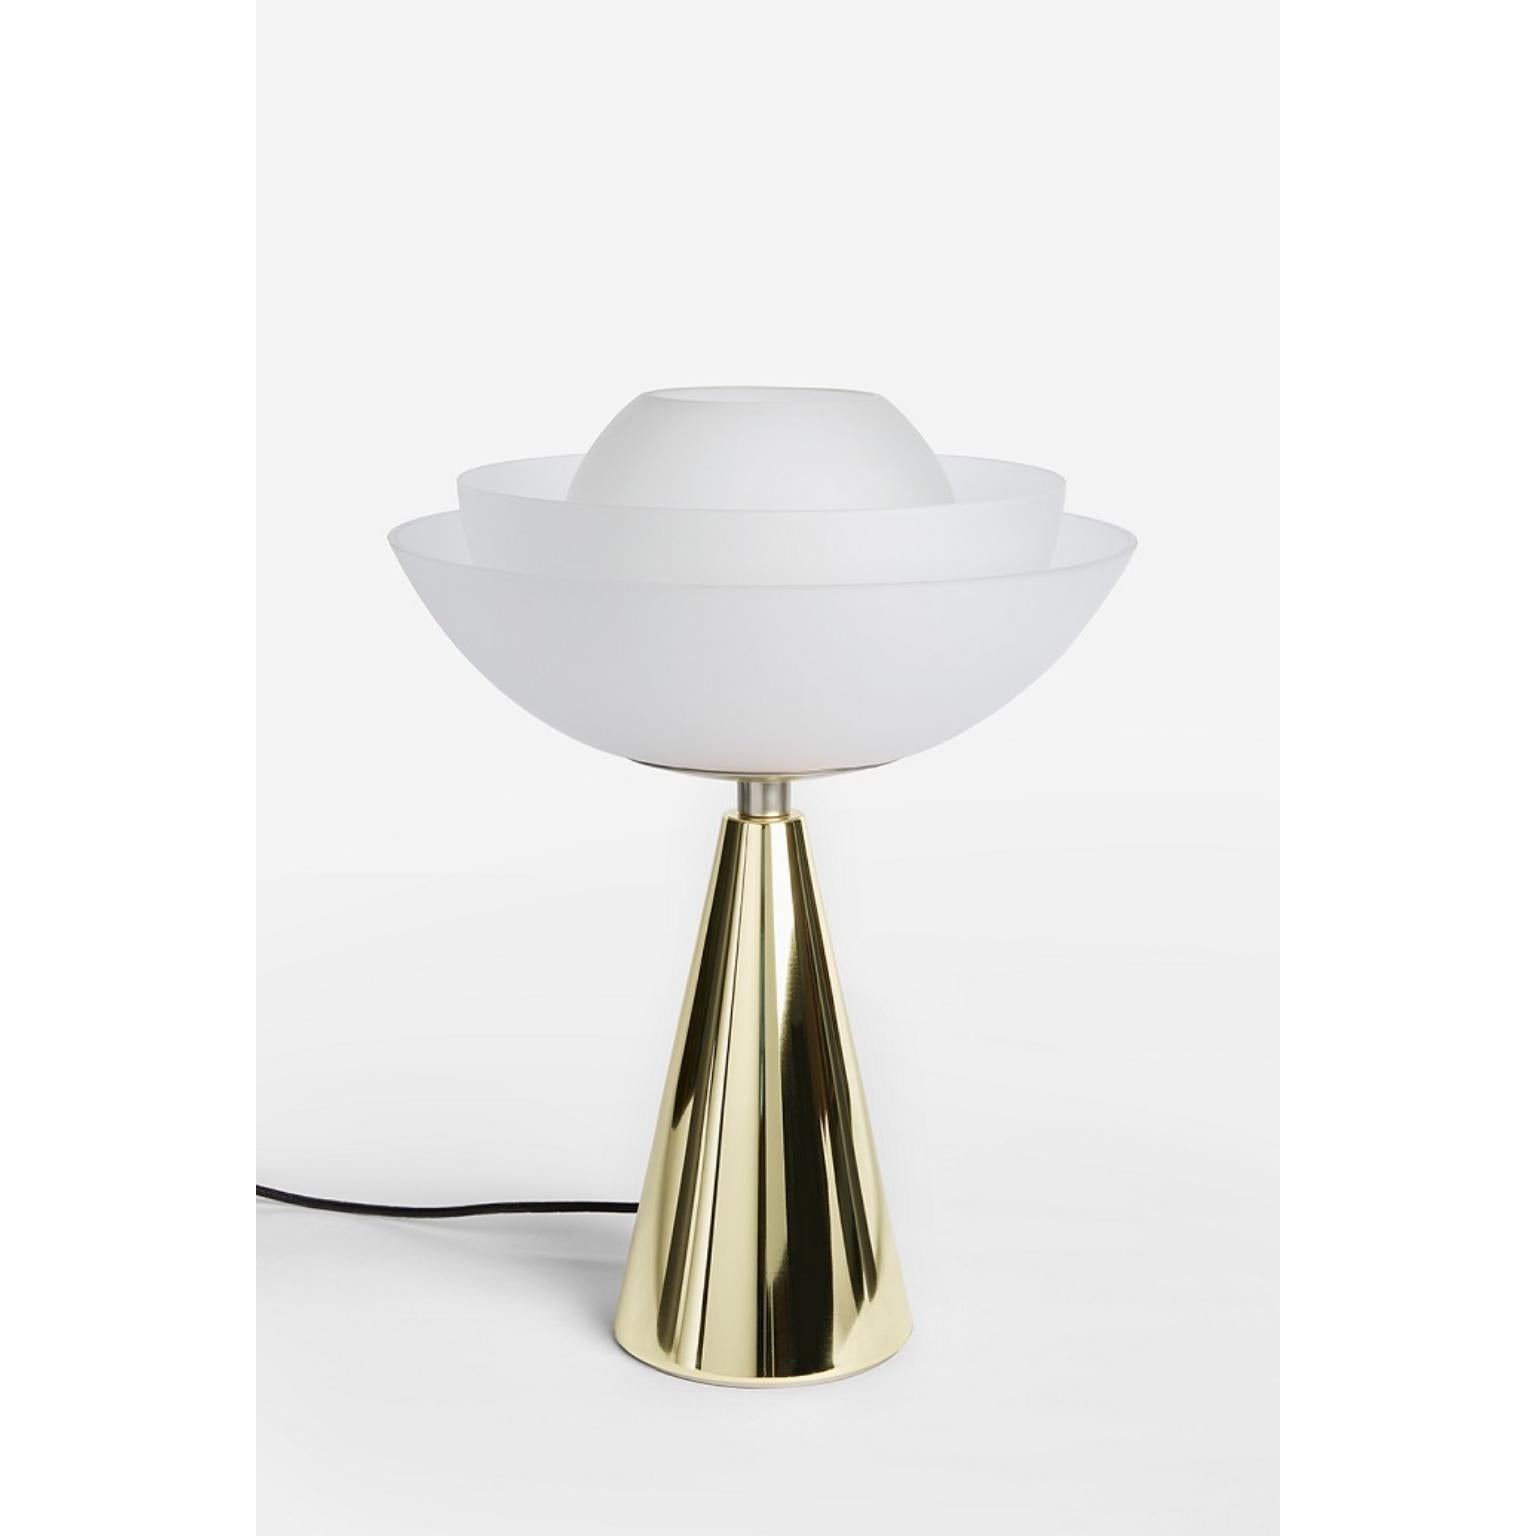 Pair of lotus table lamps by Mason Editions
Dimensions: 36 × 48 cm
Materials: matte gold 24k base + transparent smoke grey blown glass
Finishings: 
matte gold 24k base + transparent smoke grey blown glass
polished champagne gold base +